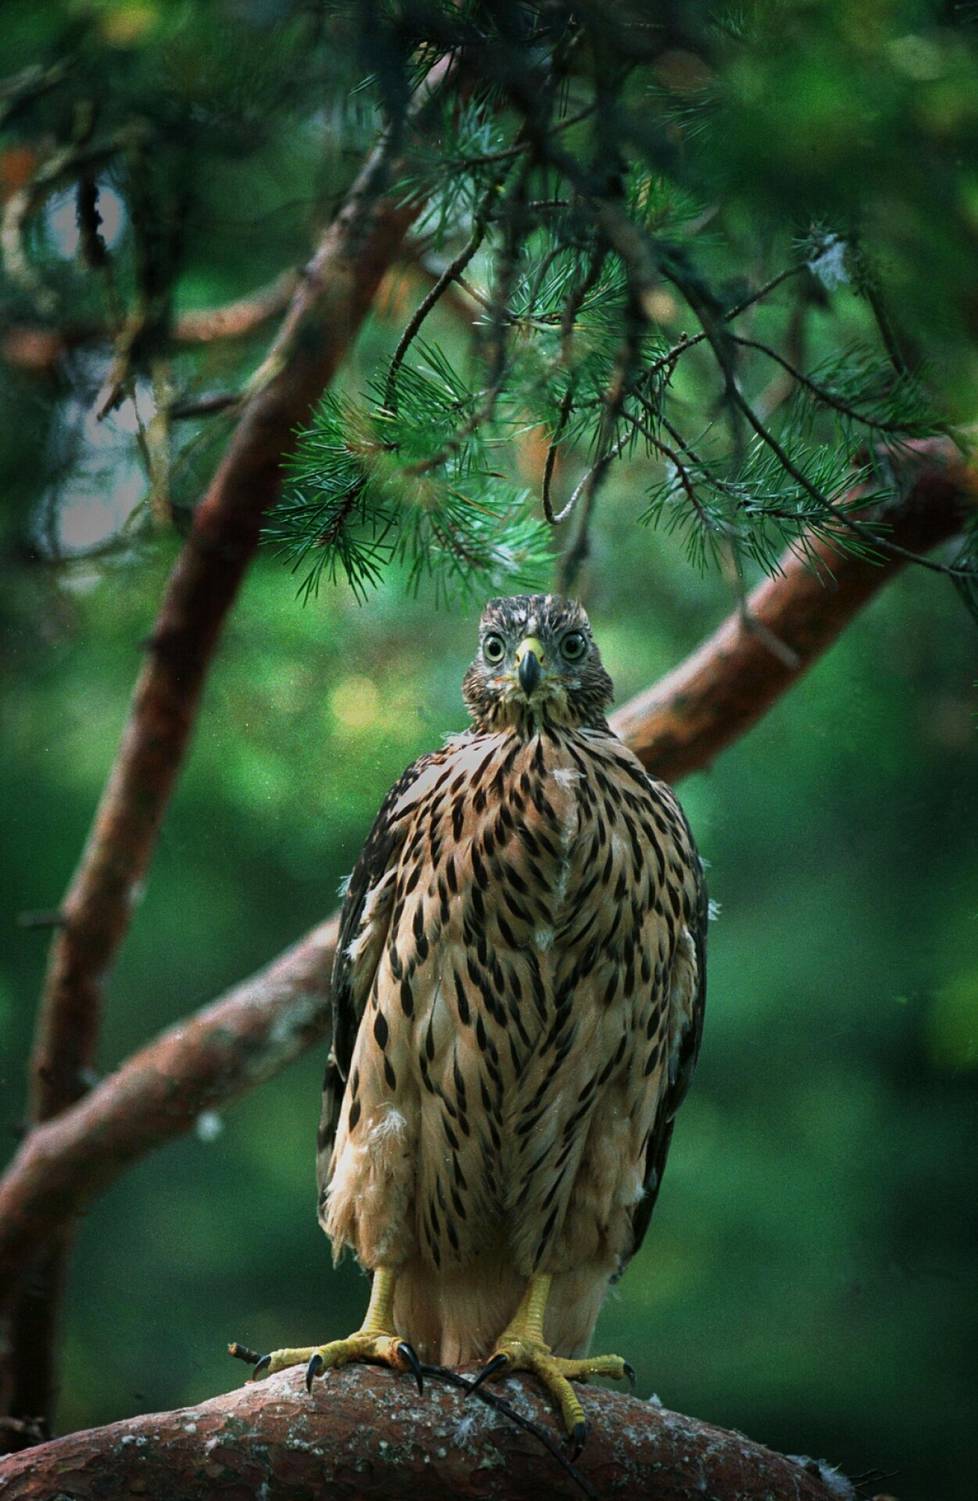 On the threshold of independence.  A five-week-old baby hen hawk stood on a branch next to the nest during midsummer week in Helsinki.